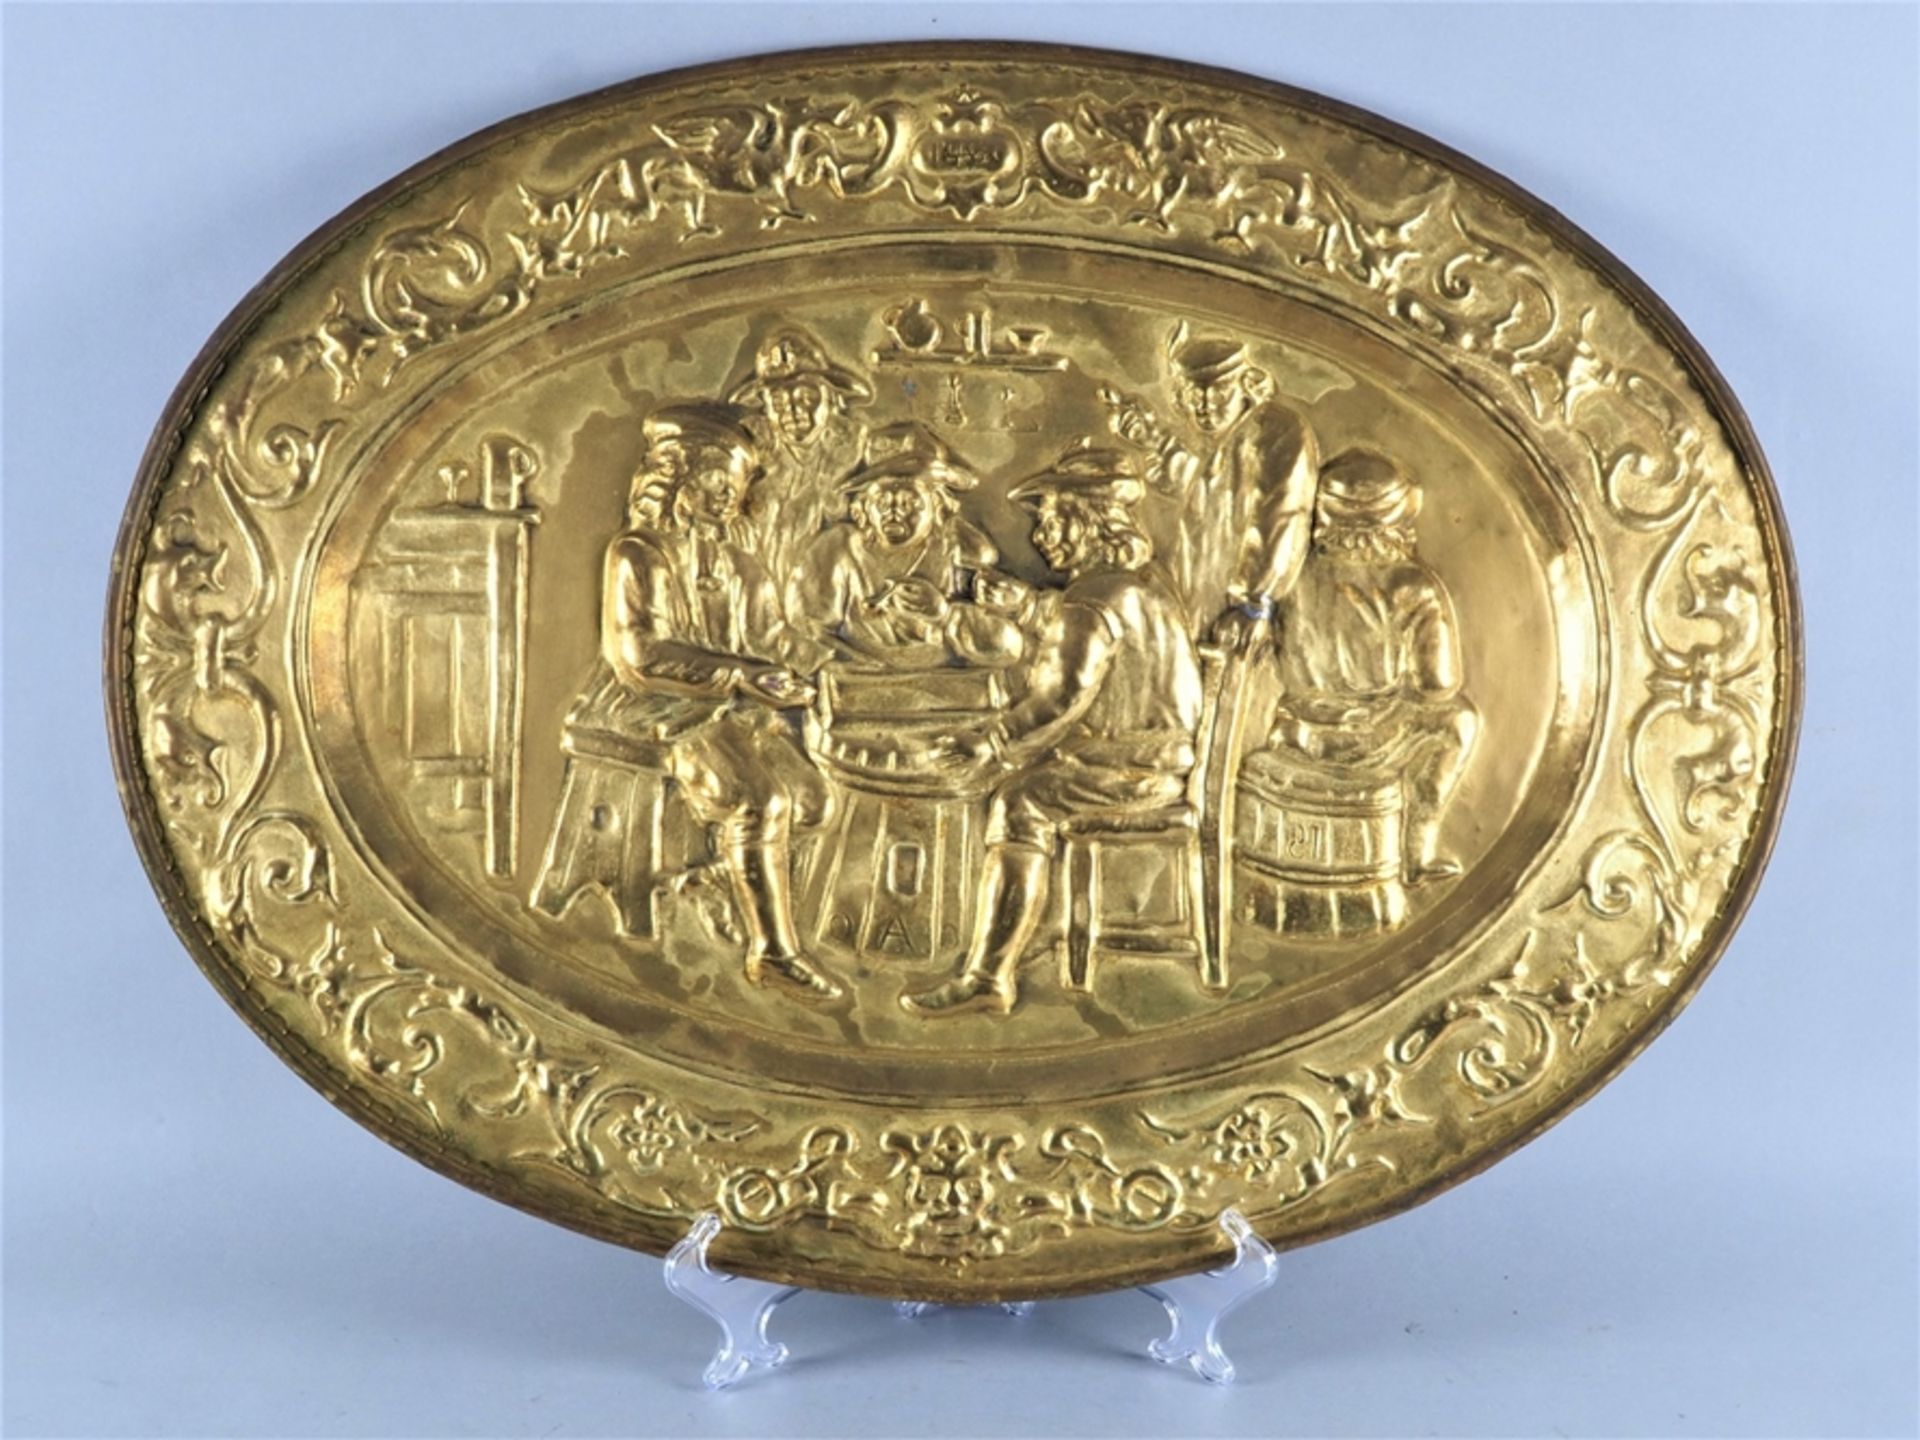 Large relief picture made of brass around 1880